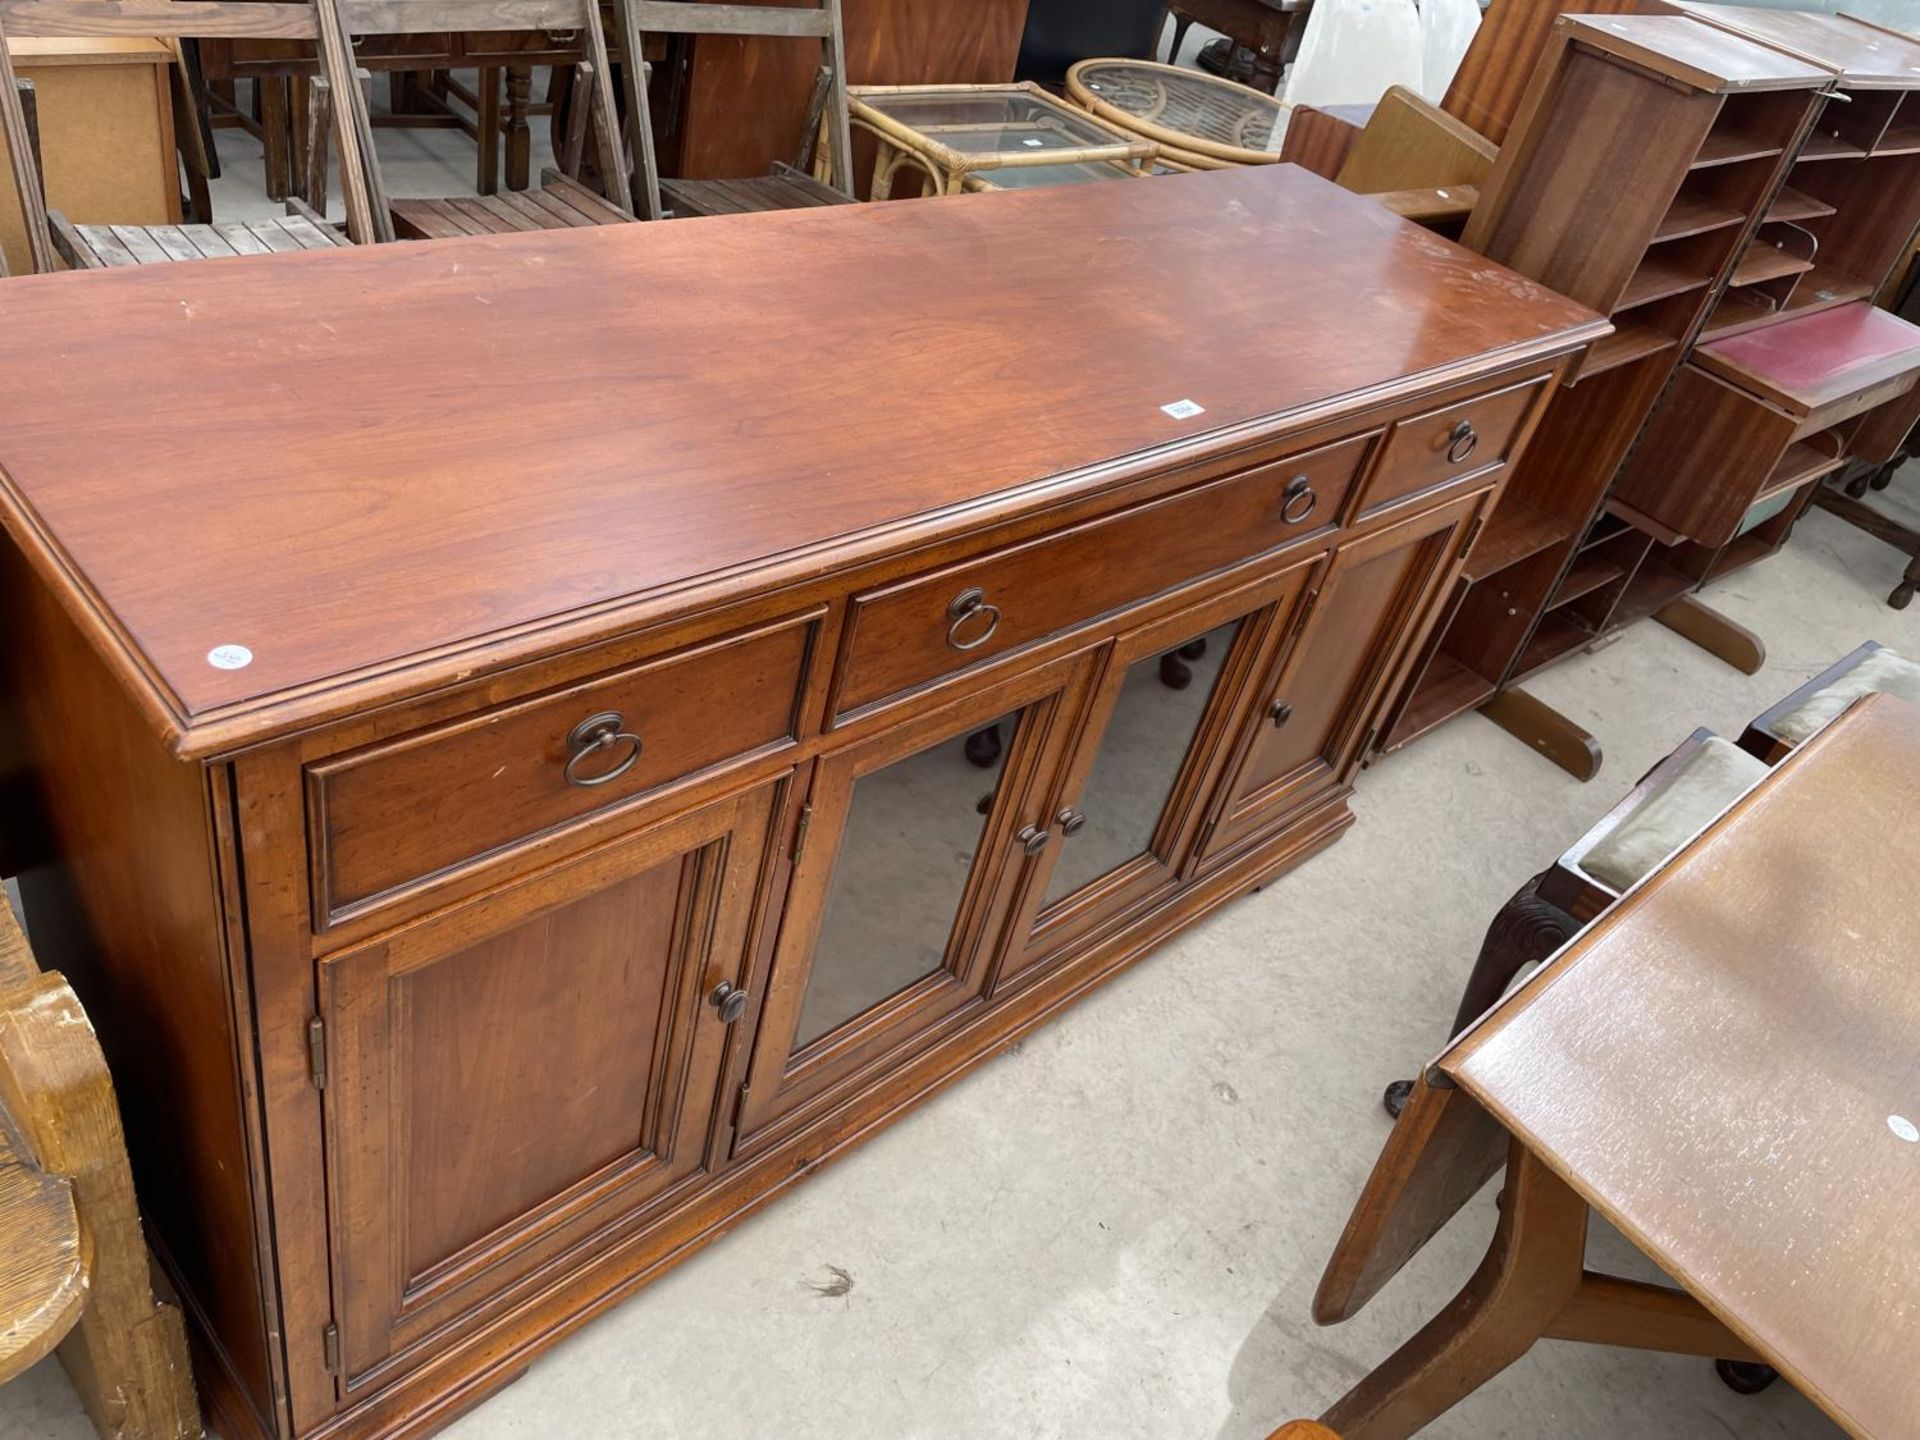 A THOMASVILLE CHERRY WOOD SIDEBOARD/STEREO CABINET, 64" WIDE